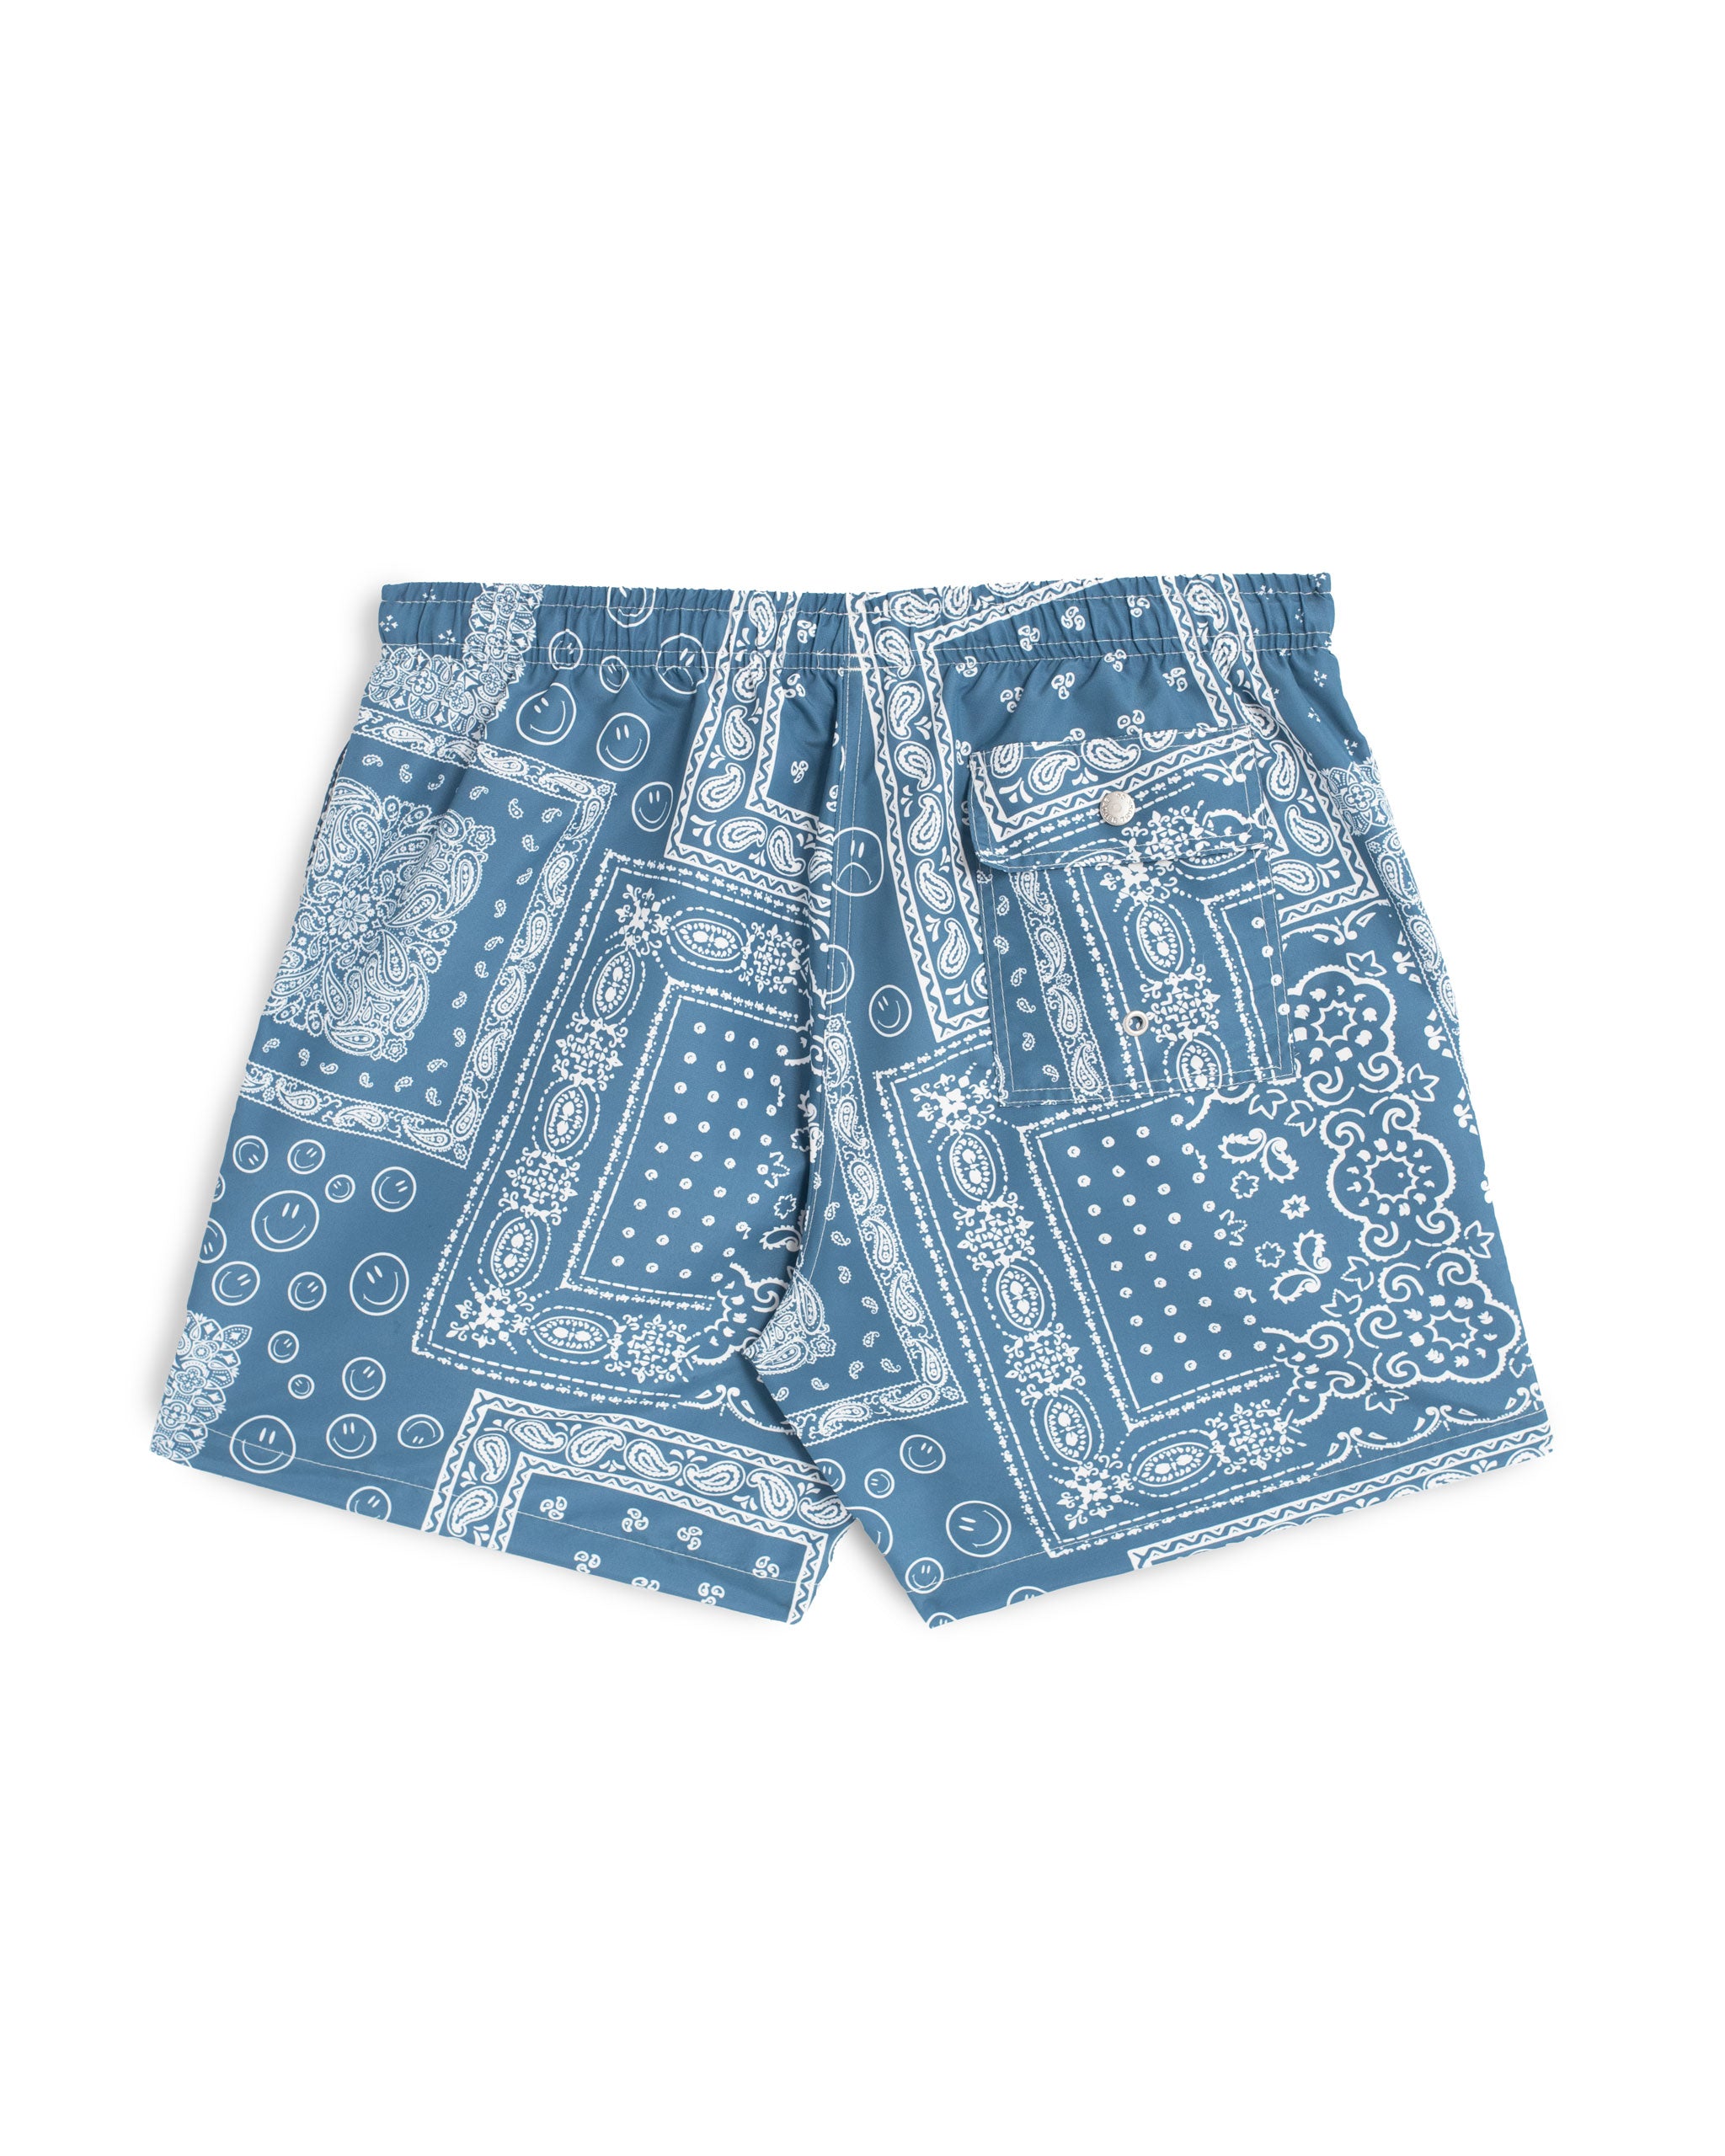 Back Shot of Blue swim trunk with all-over bandana print